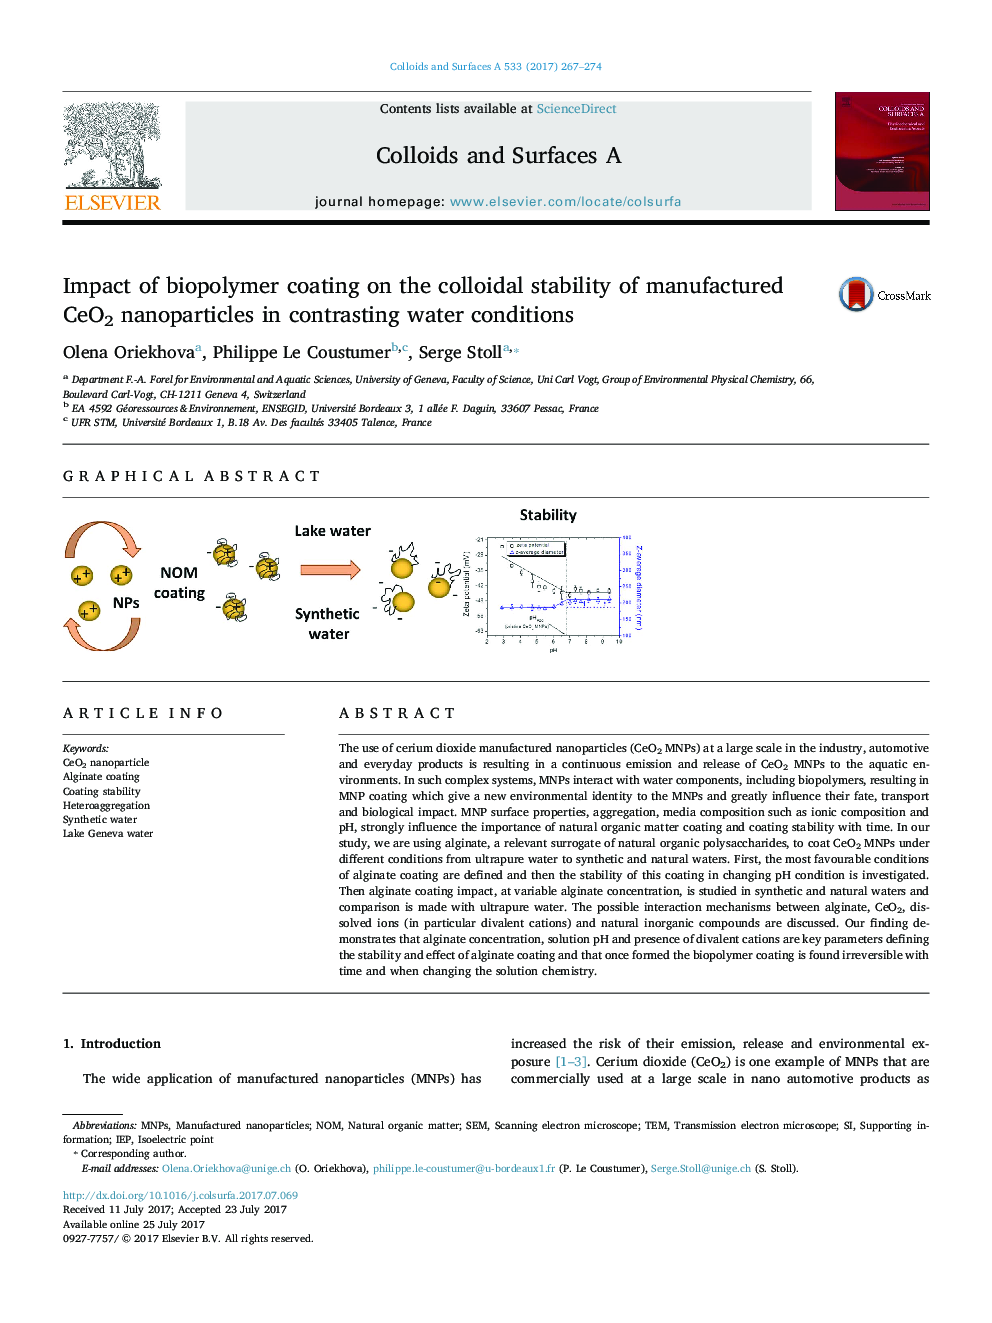 Impact of biopolymer coating on the colloidal stability of manufactured CeO2 nanoparticles in contrasting water conditions